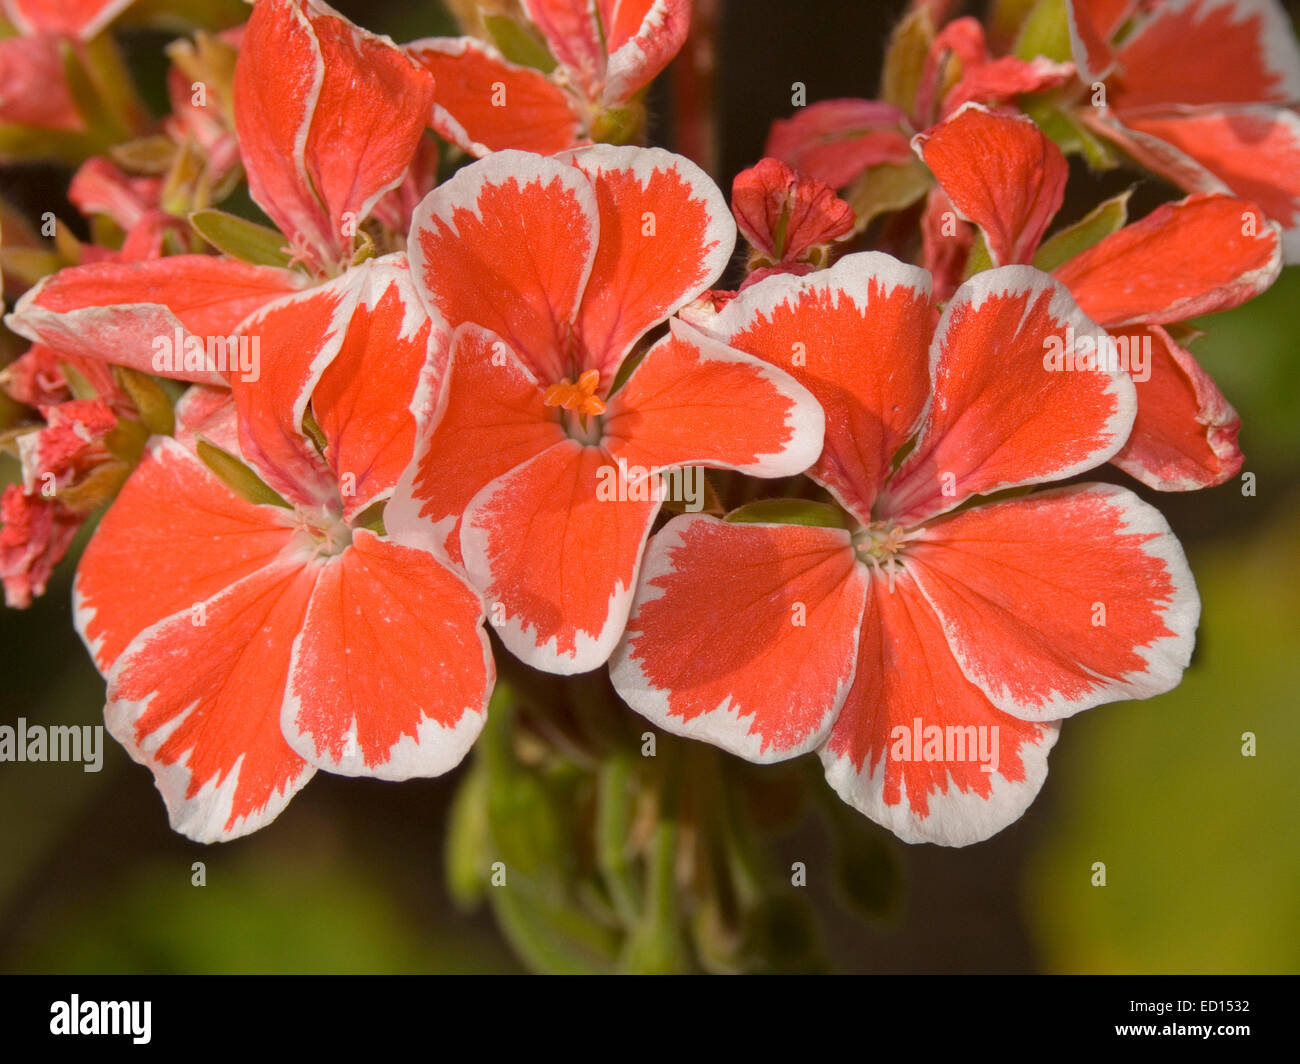 Cluster of bright orange flowers, with petals edged with white, of geranium Mr Wren against background of green foliage Stock Photo